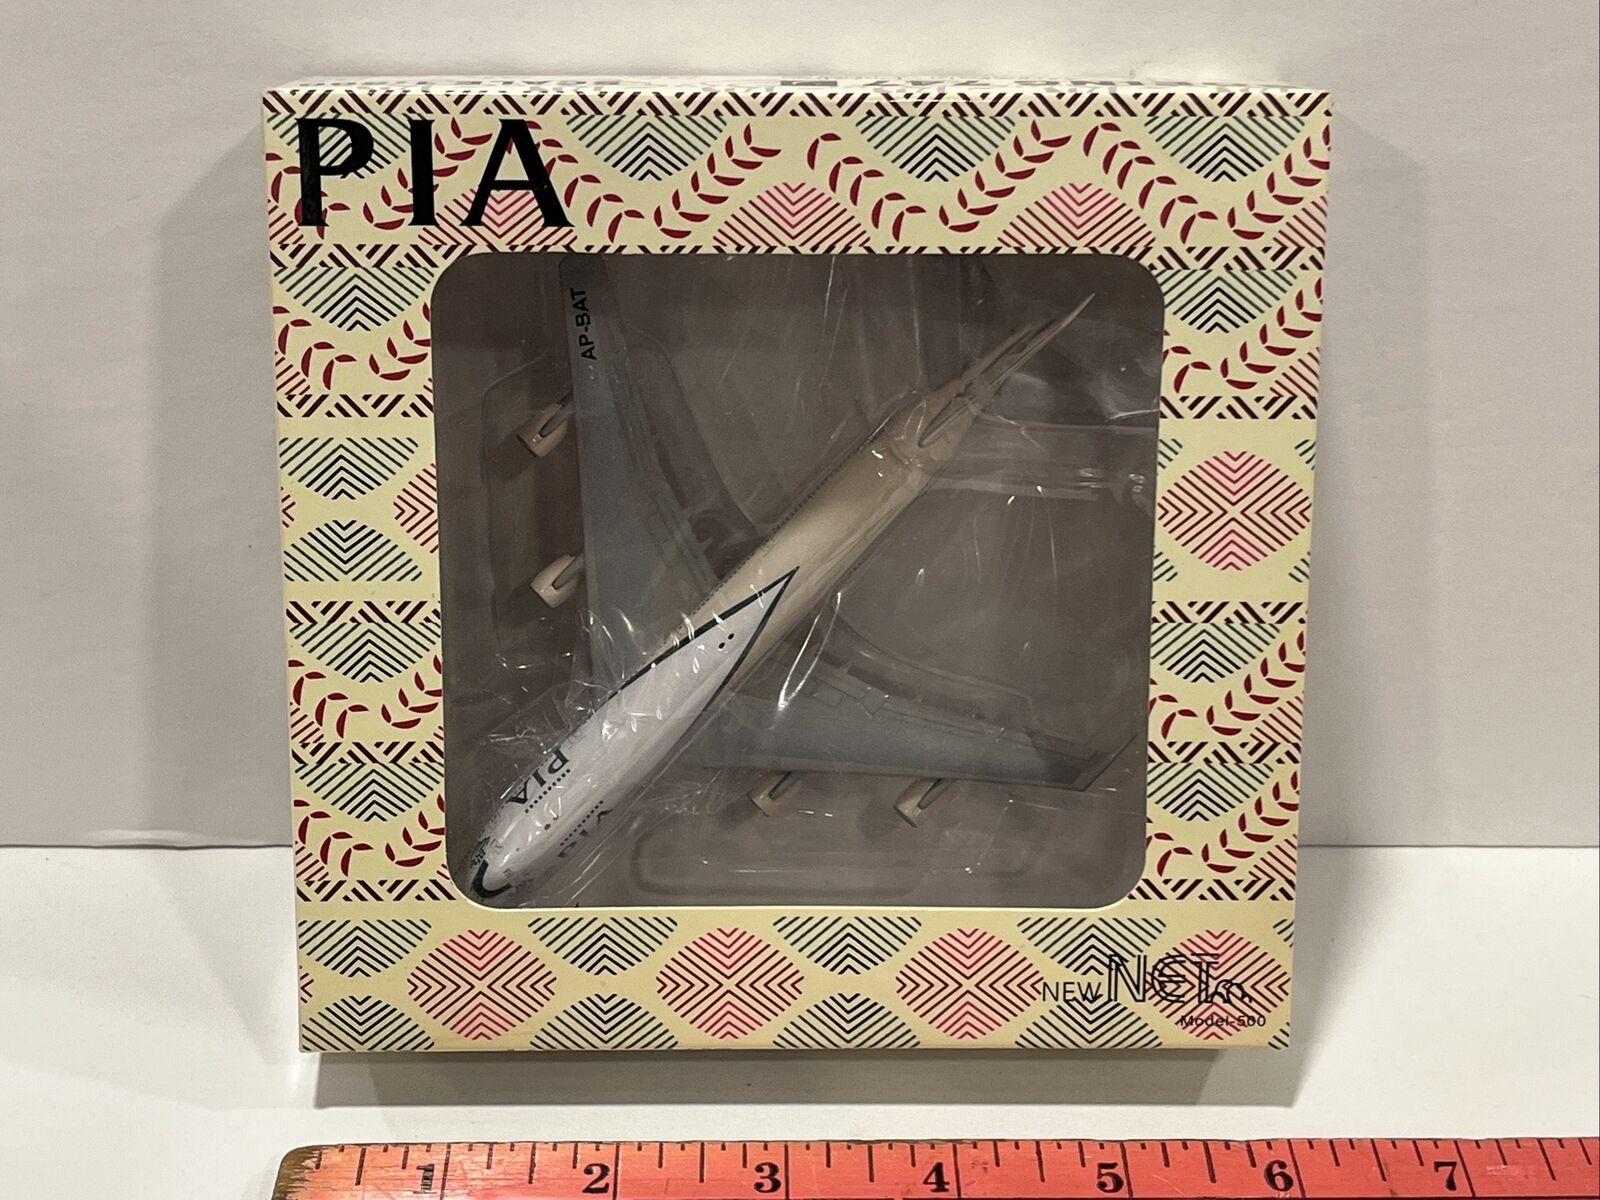 1:500 Herpa PIA Pakistan International Airlines Boeing 747 Toy Airliner Scale